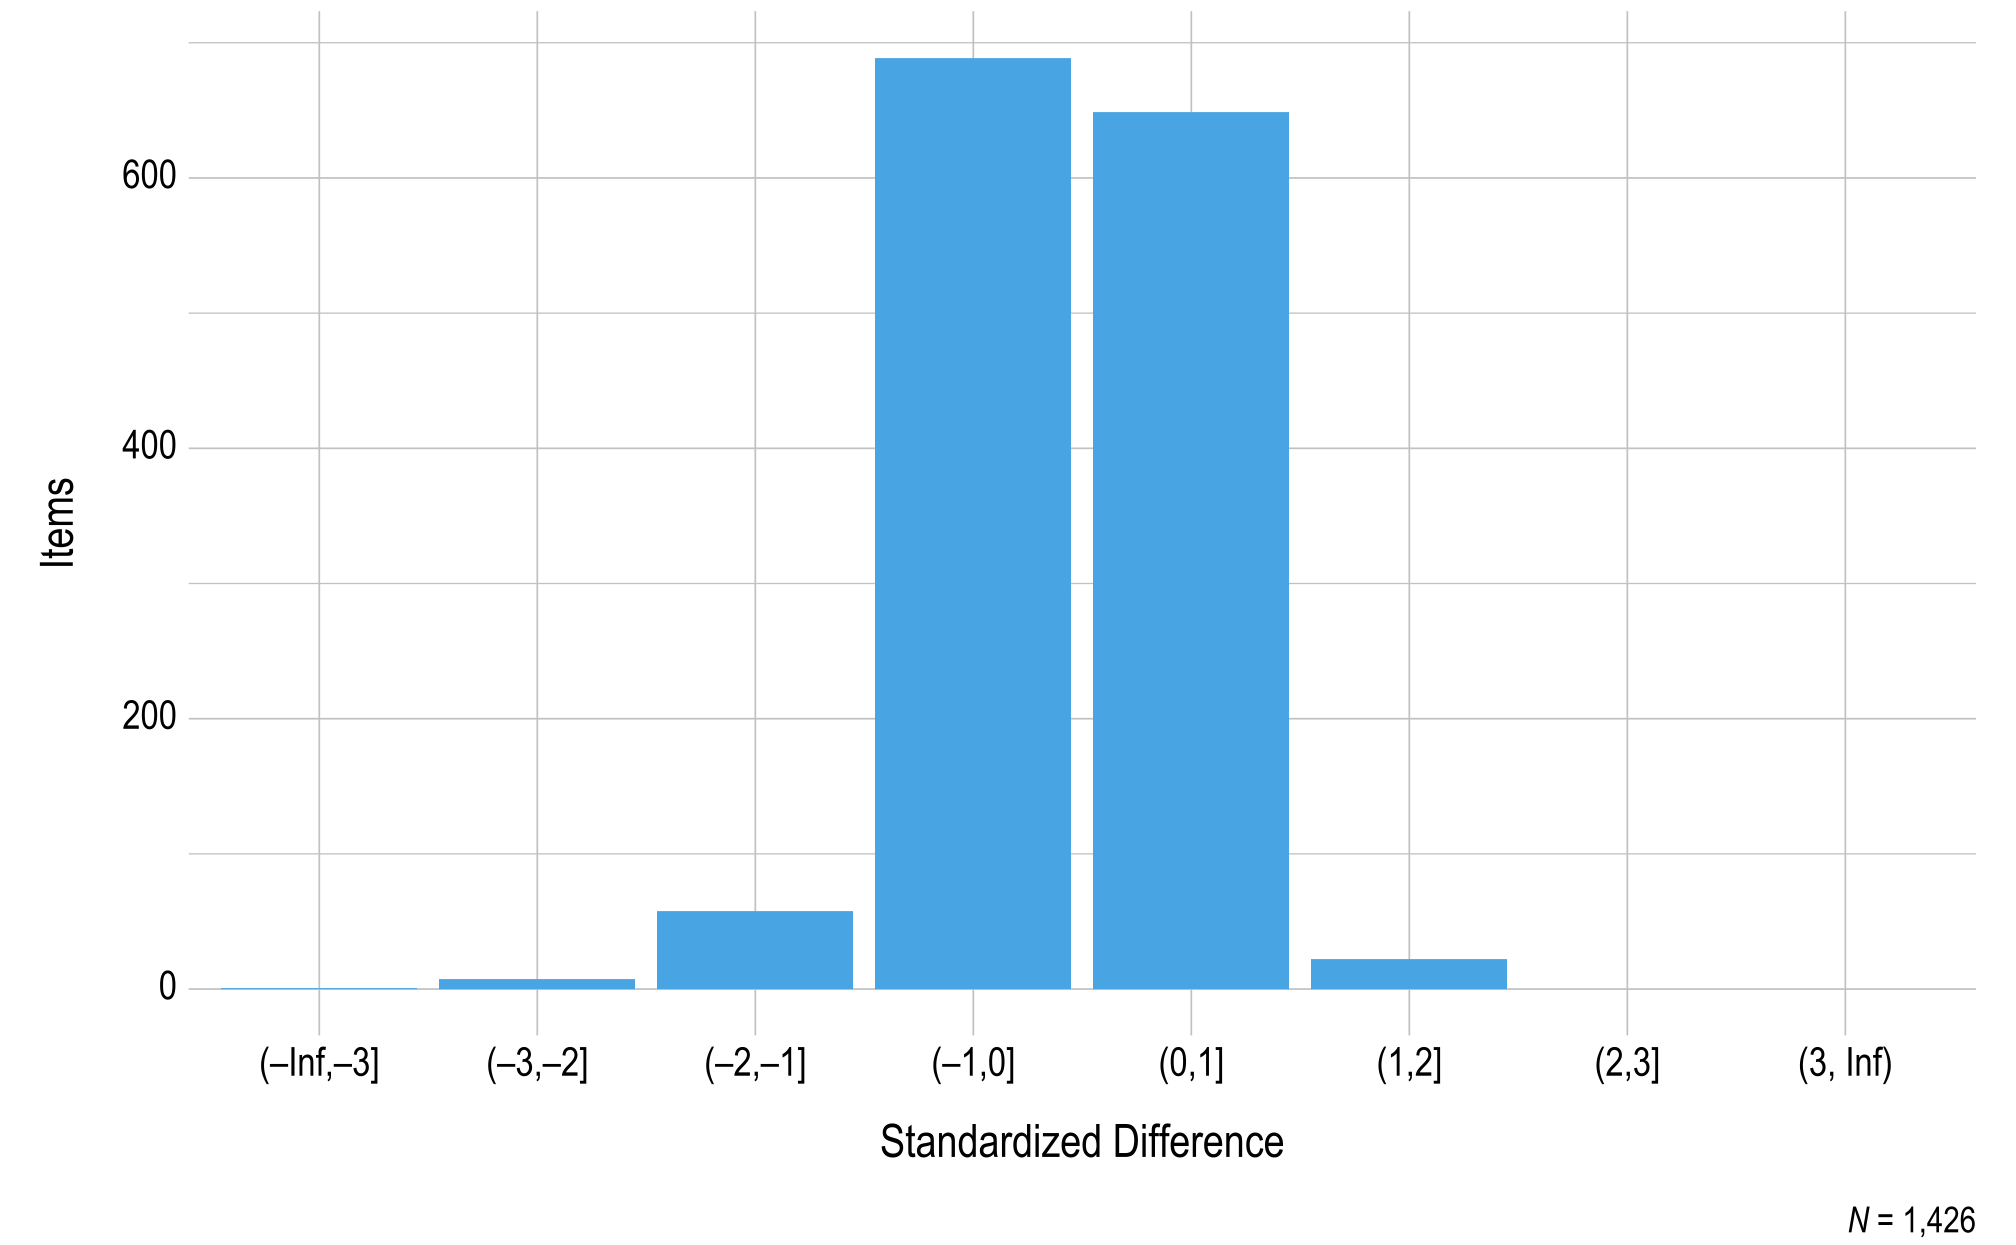 This figure contains a histogram displaying standardized difference on the x-axis and the number of mathematics operational items on the y-axis.